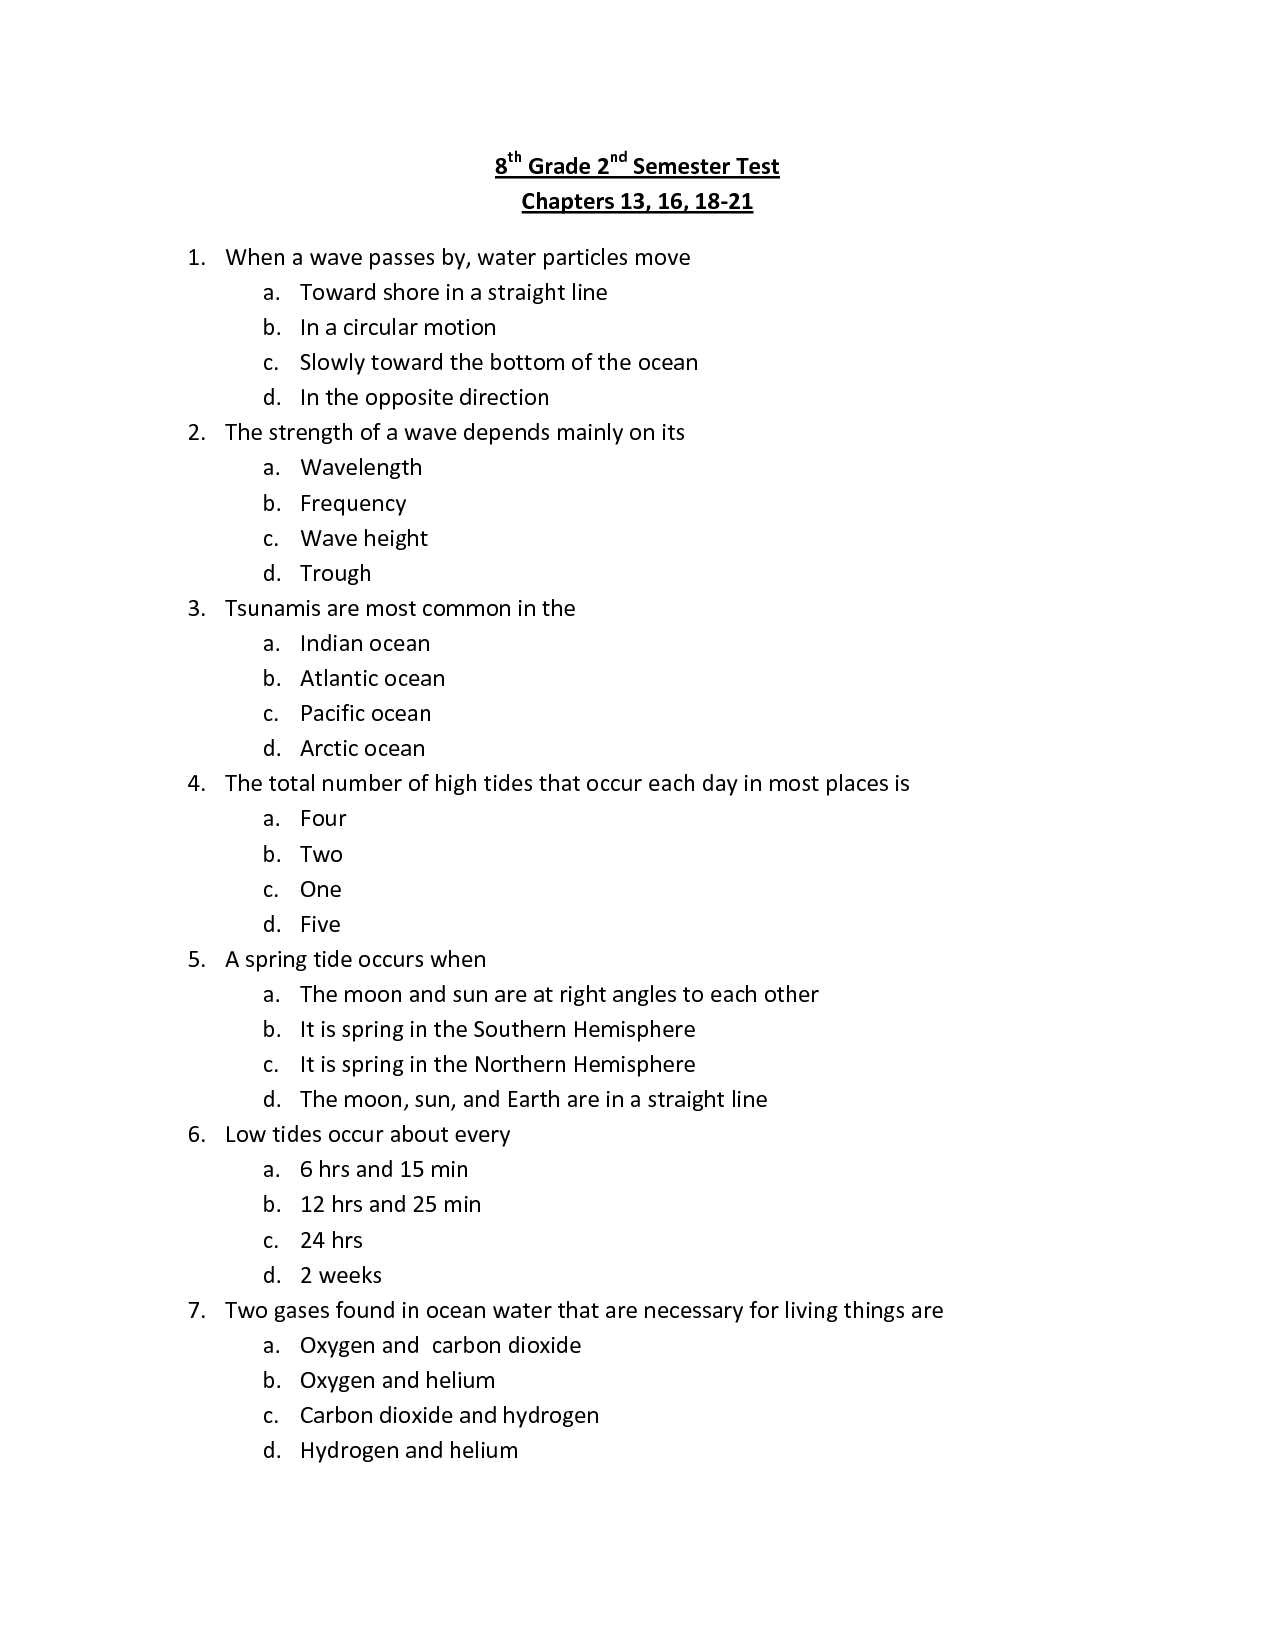 16 Best Images of 8th Grade Language Arts Worksheets - Free Printable